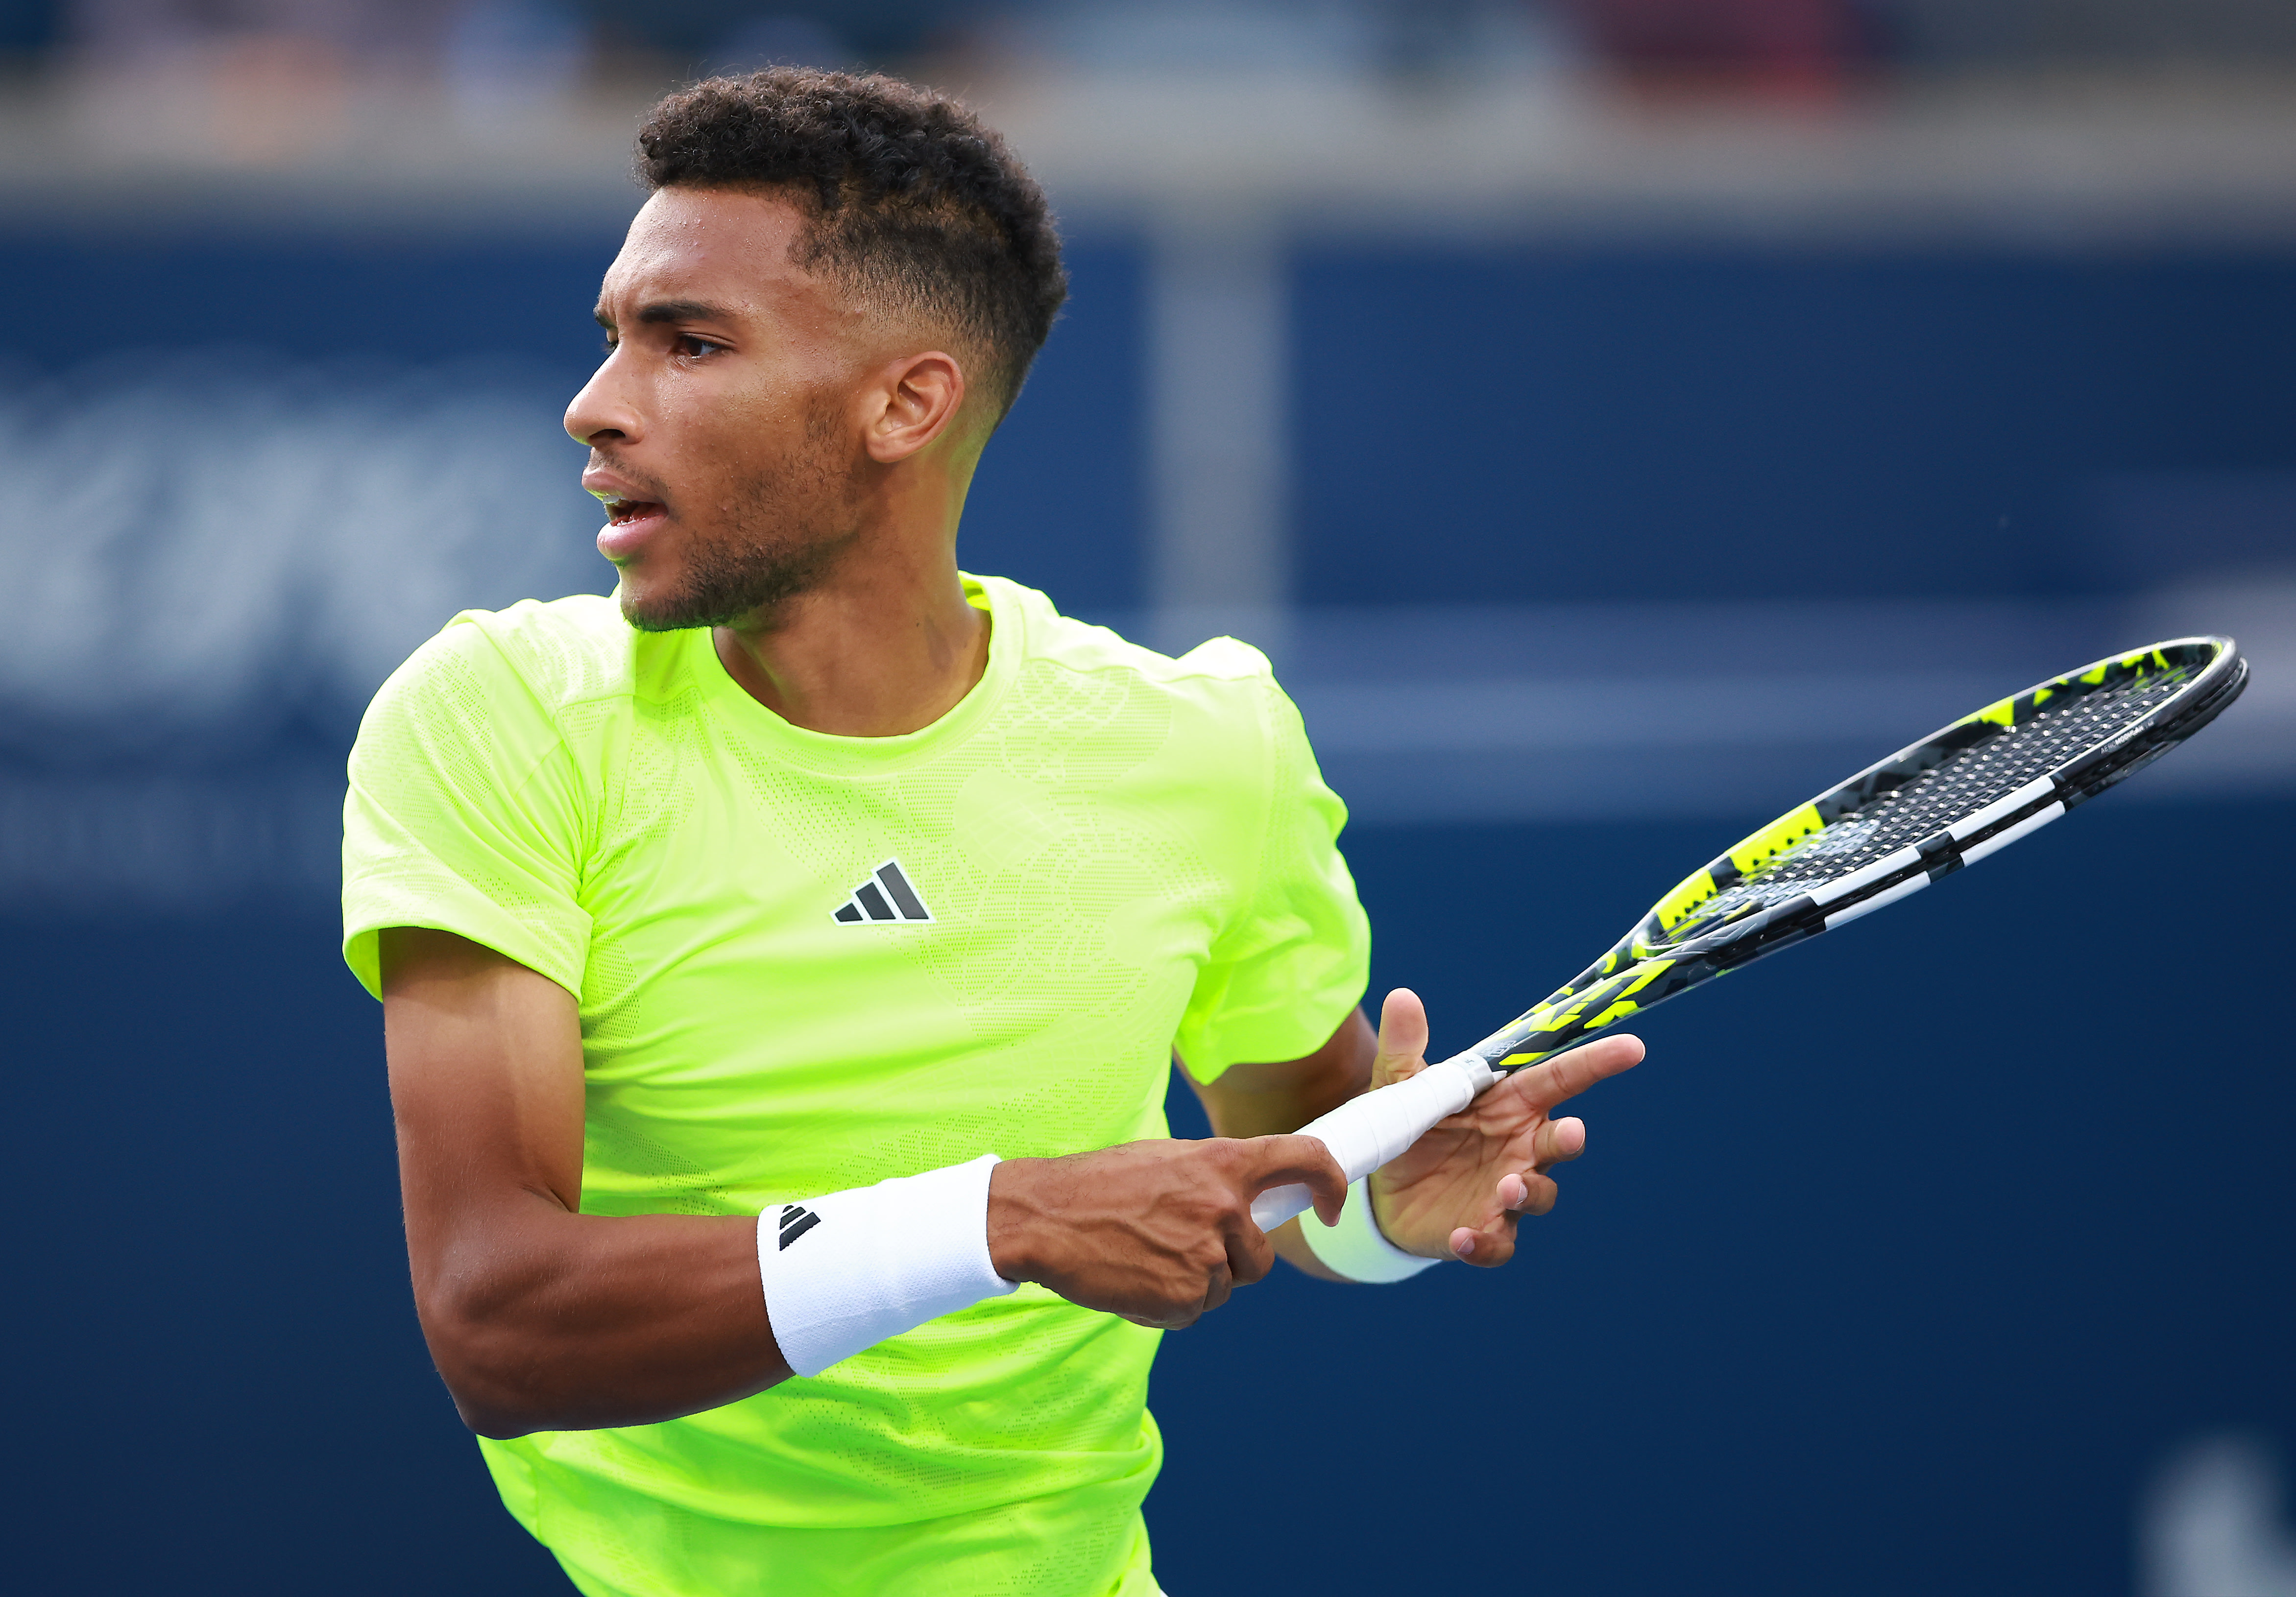 Felix Auger-Aliassime scores first win since May in Cincinnati “I never doubted my abilities or the player I am”